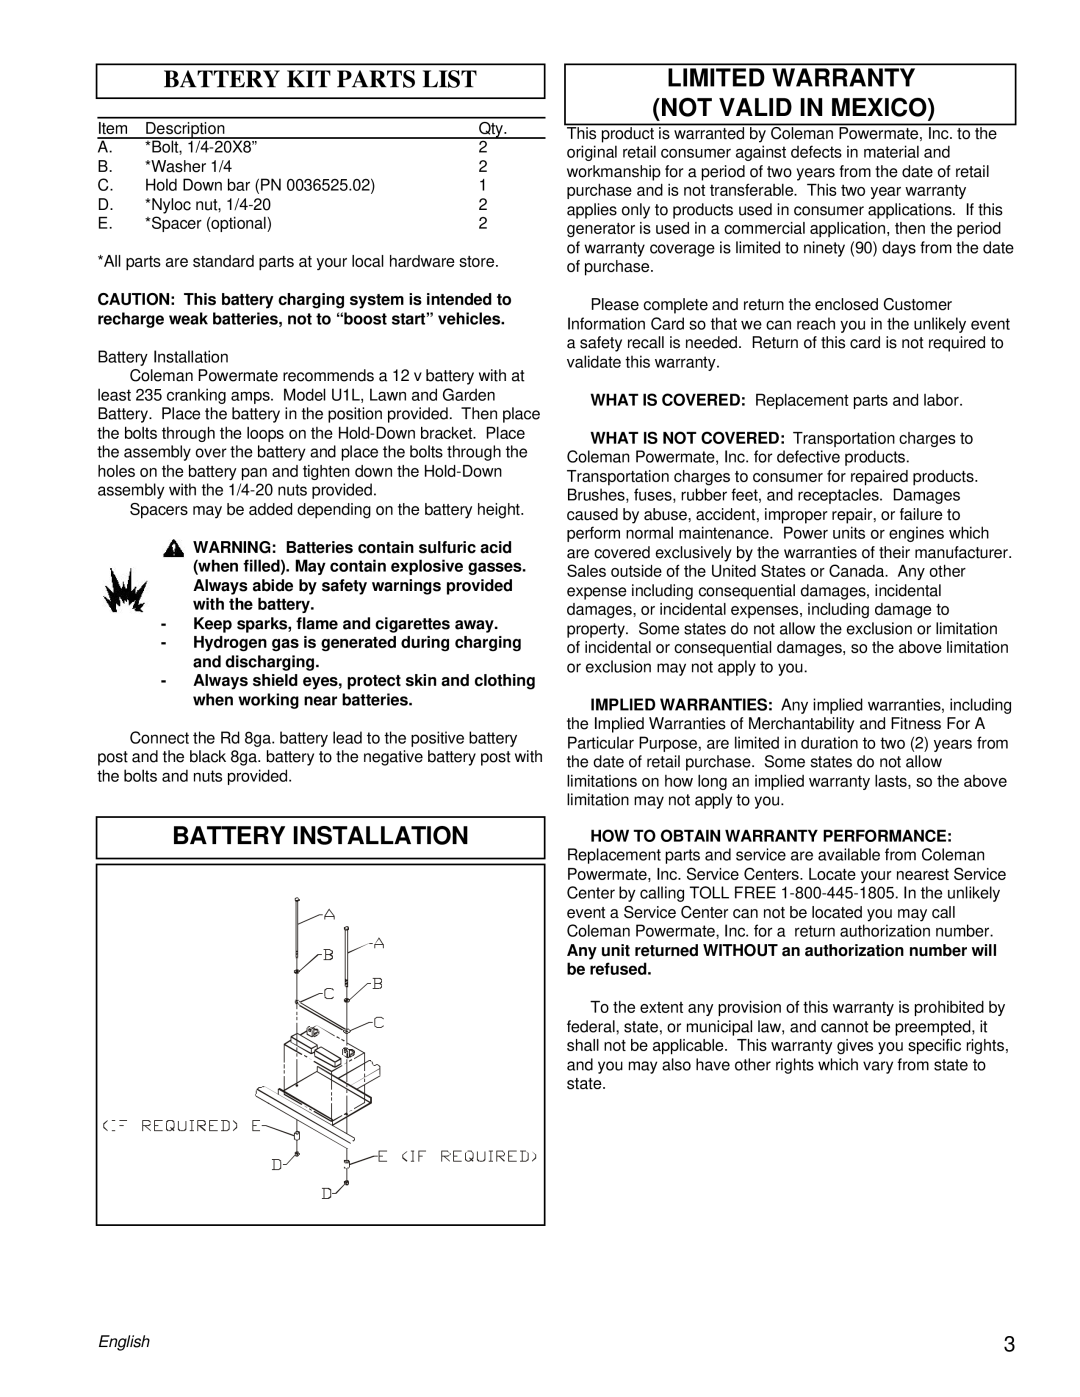 Powermate PC0505622.17 manual Battery Installation, Battery Kit Parts List, Limited Warranty Not Valid In Mexico, English 